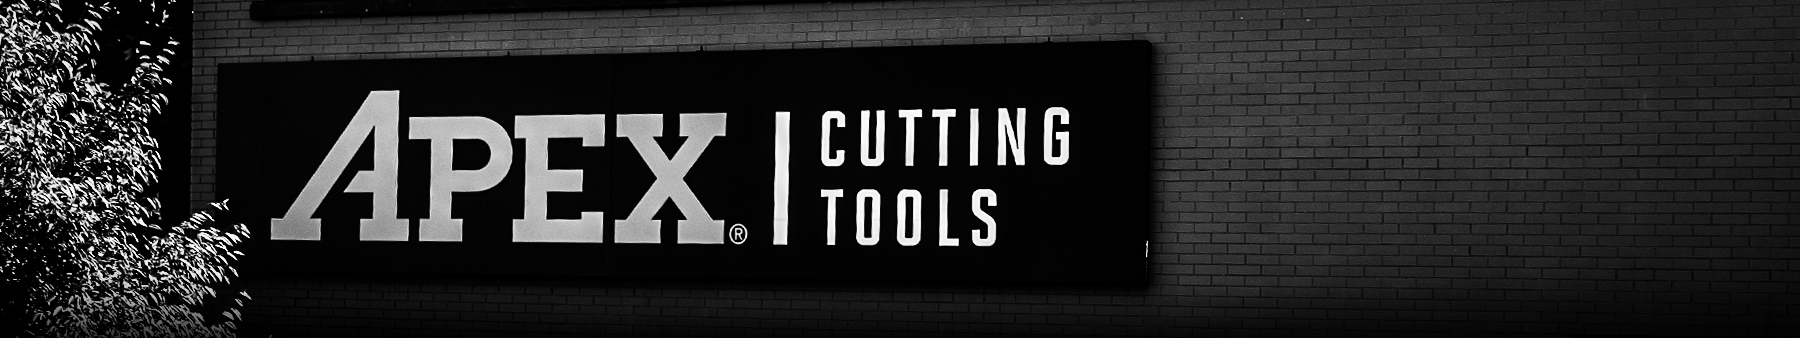 Contact Us, Apex Cutting Tools, Tool Cutters in Niagara